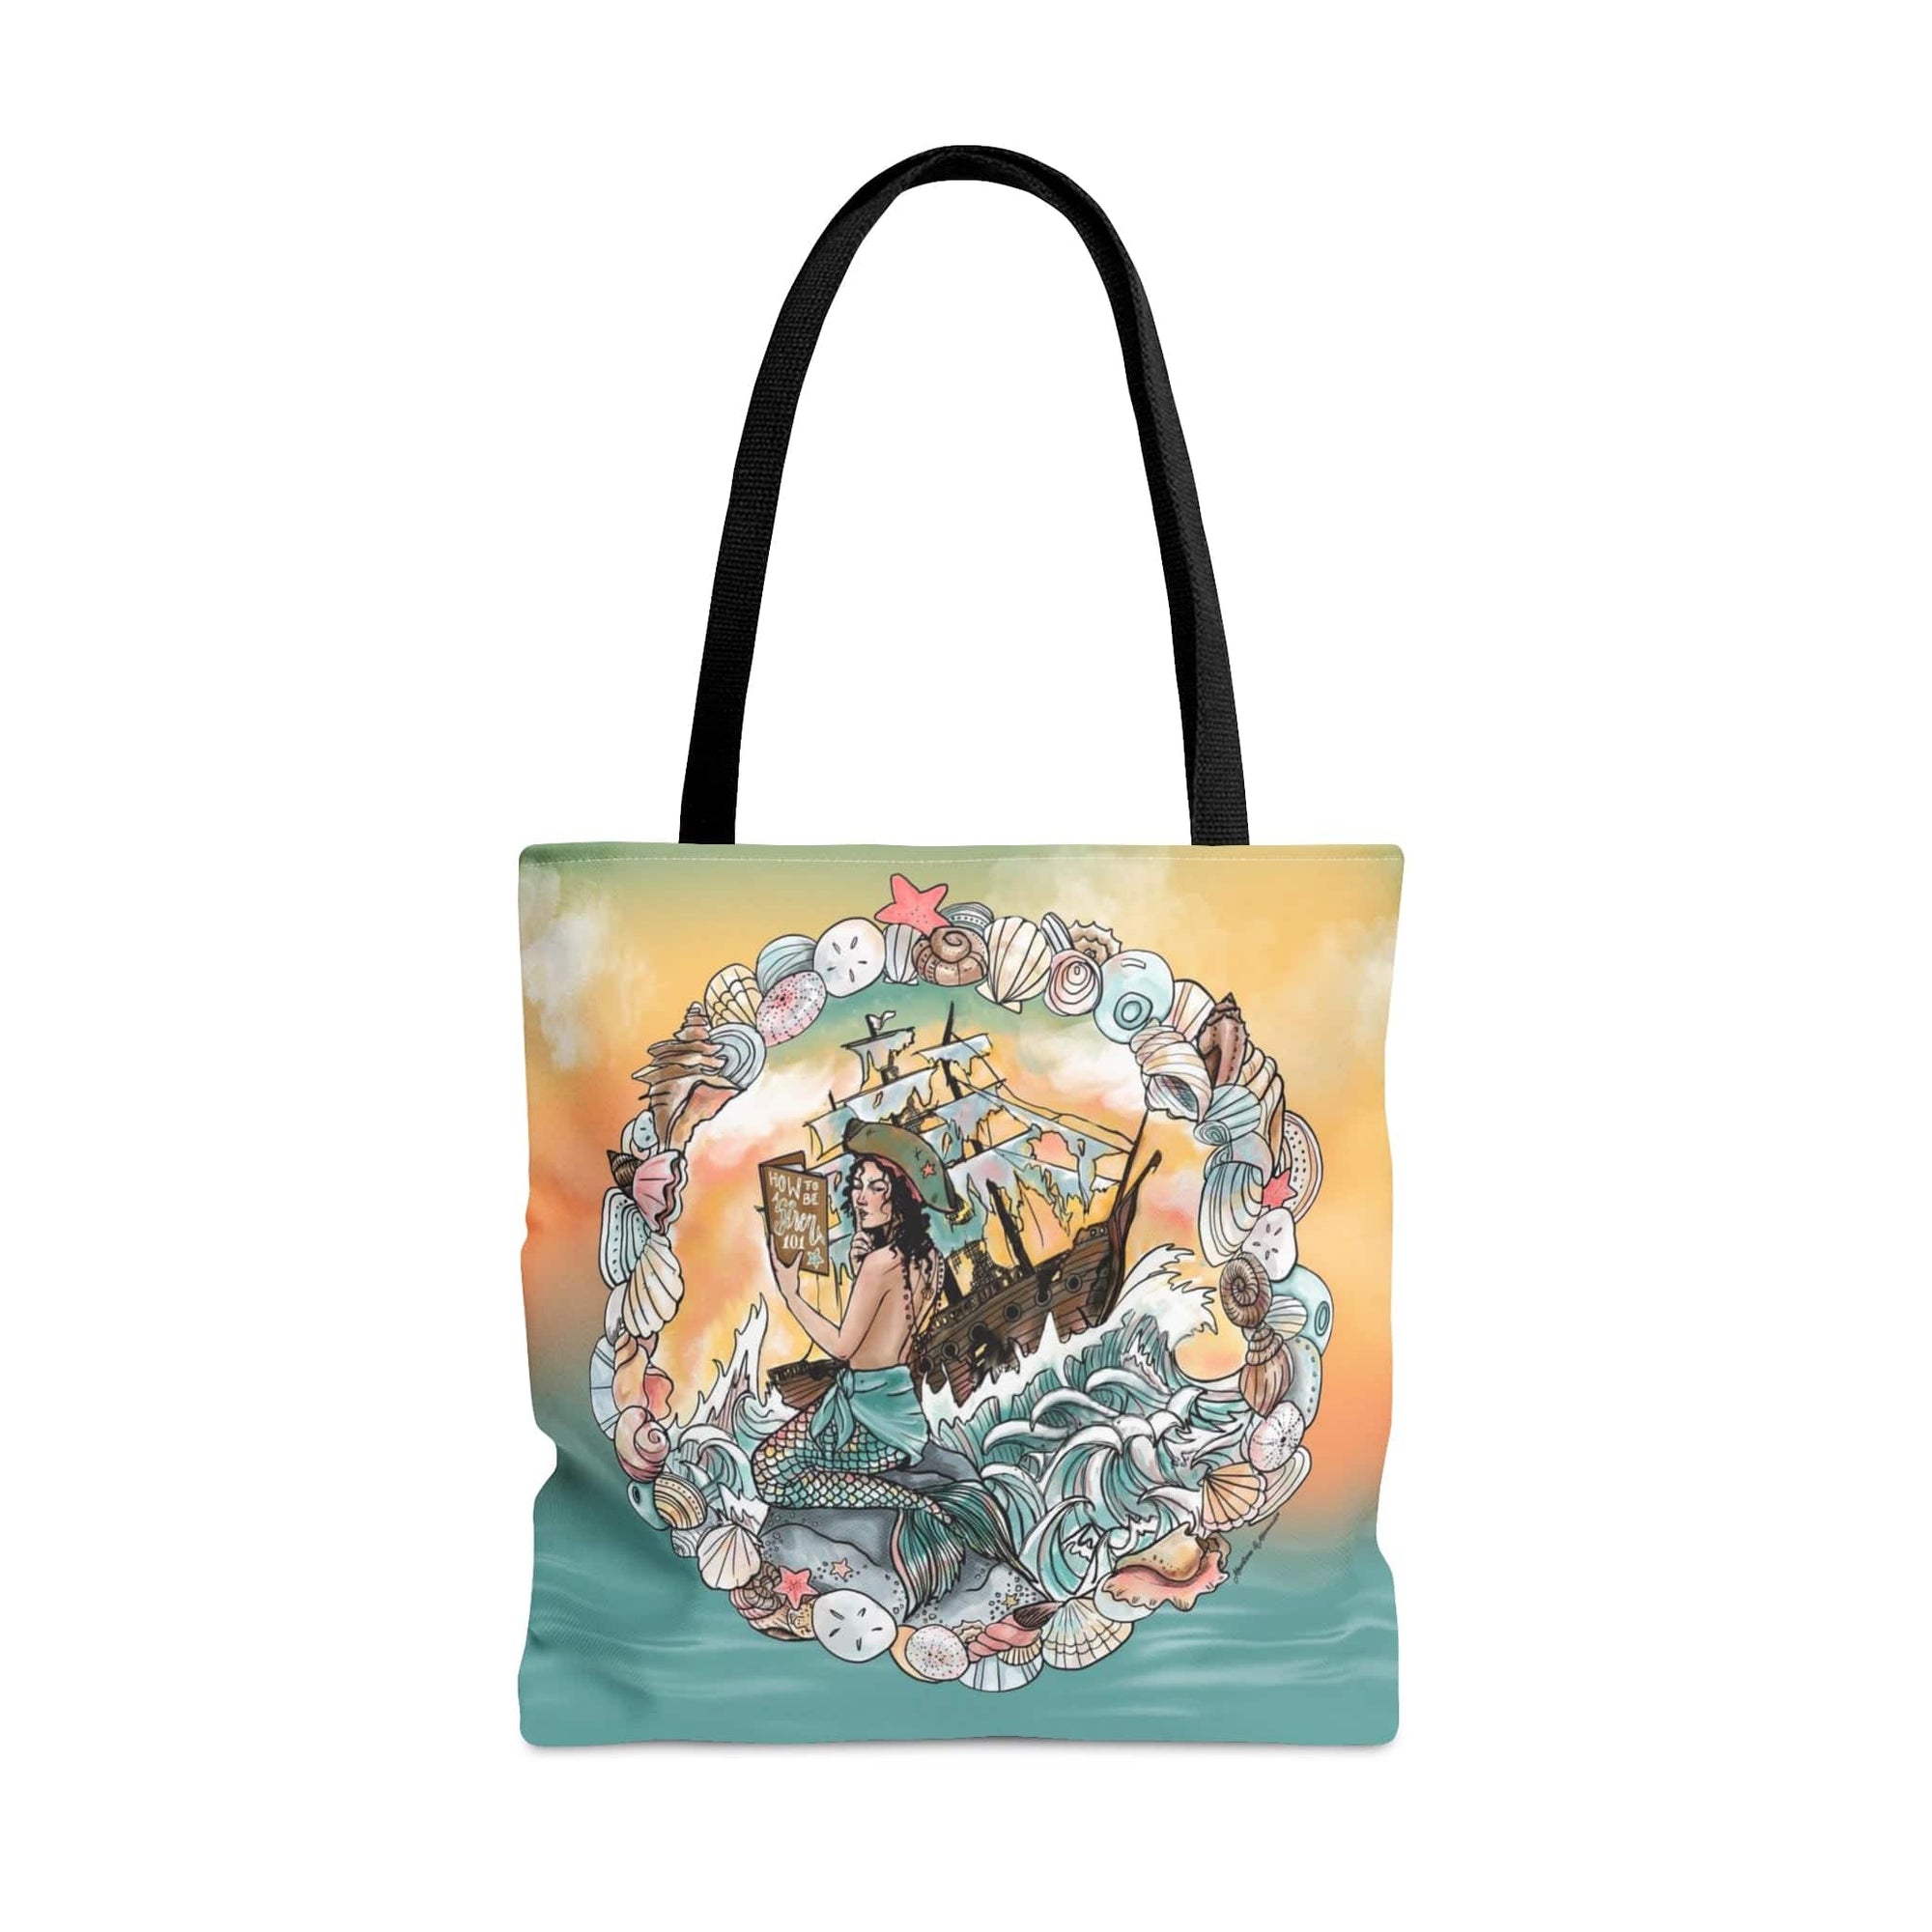 How To Be A Siren 101 Tote Bag - Mountains & Mermaids